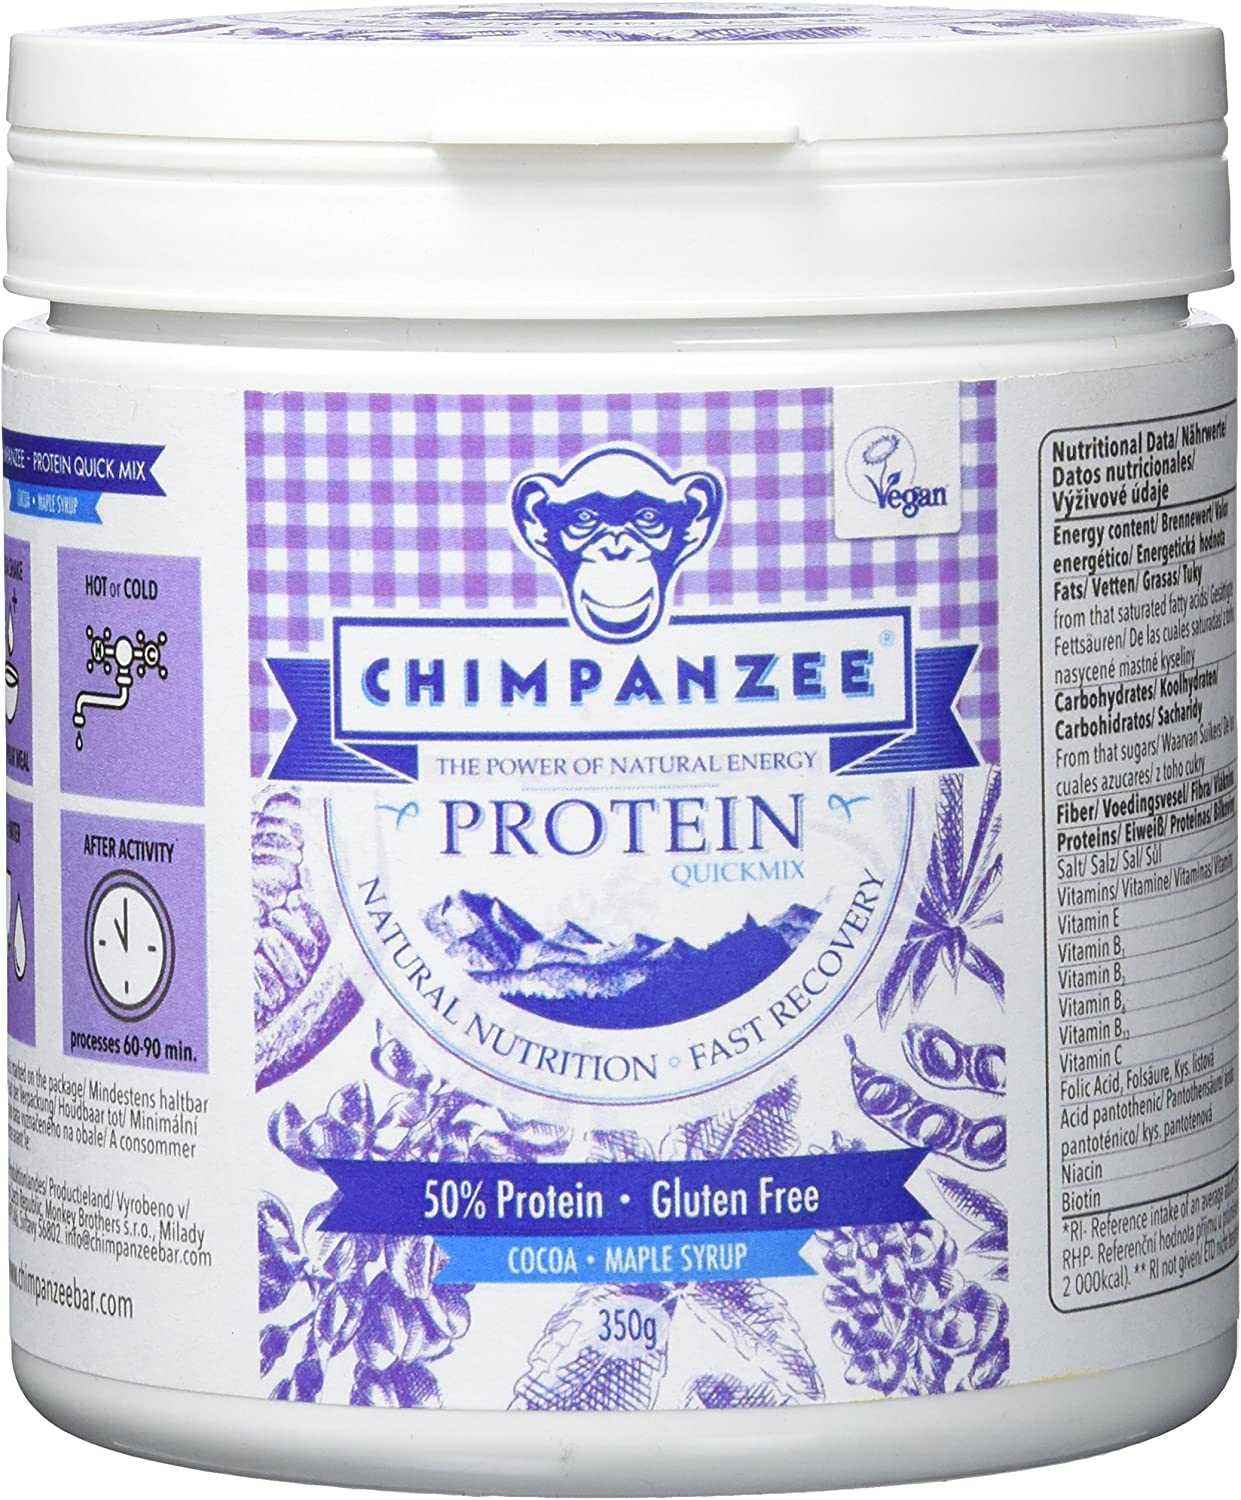 CHIMPANZEE Quick Mix Shake Protein 350 g Cocoa & Maple Syrup (VE 1/Price Per Bag) Diet, Purple, Standard Size